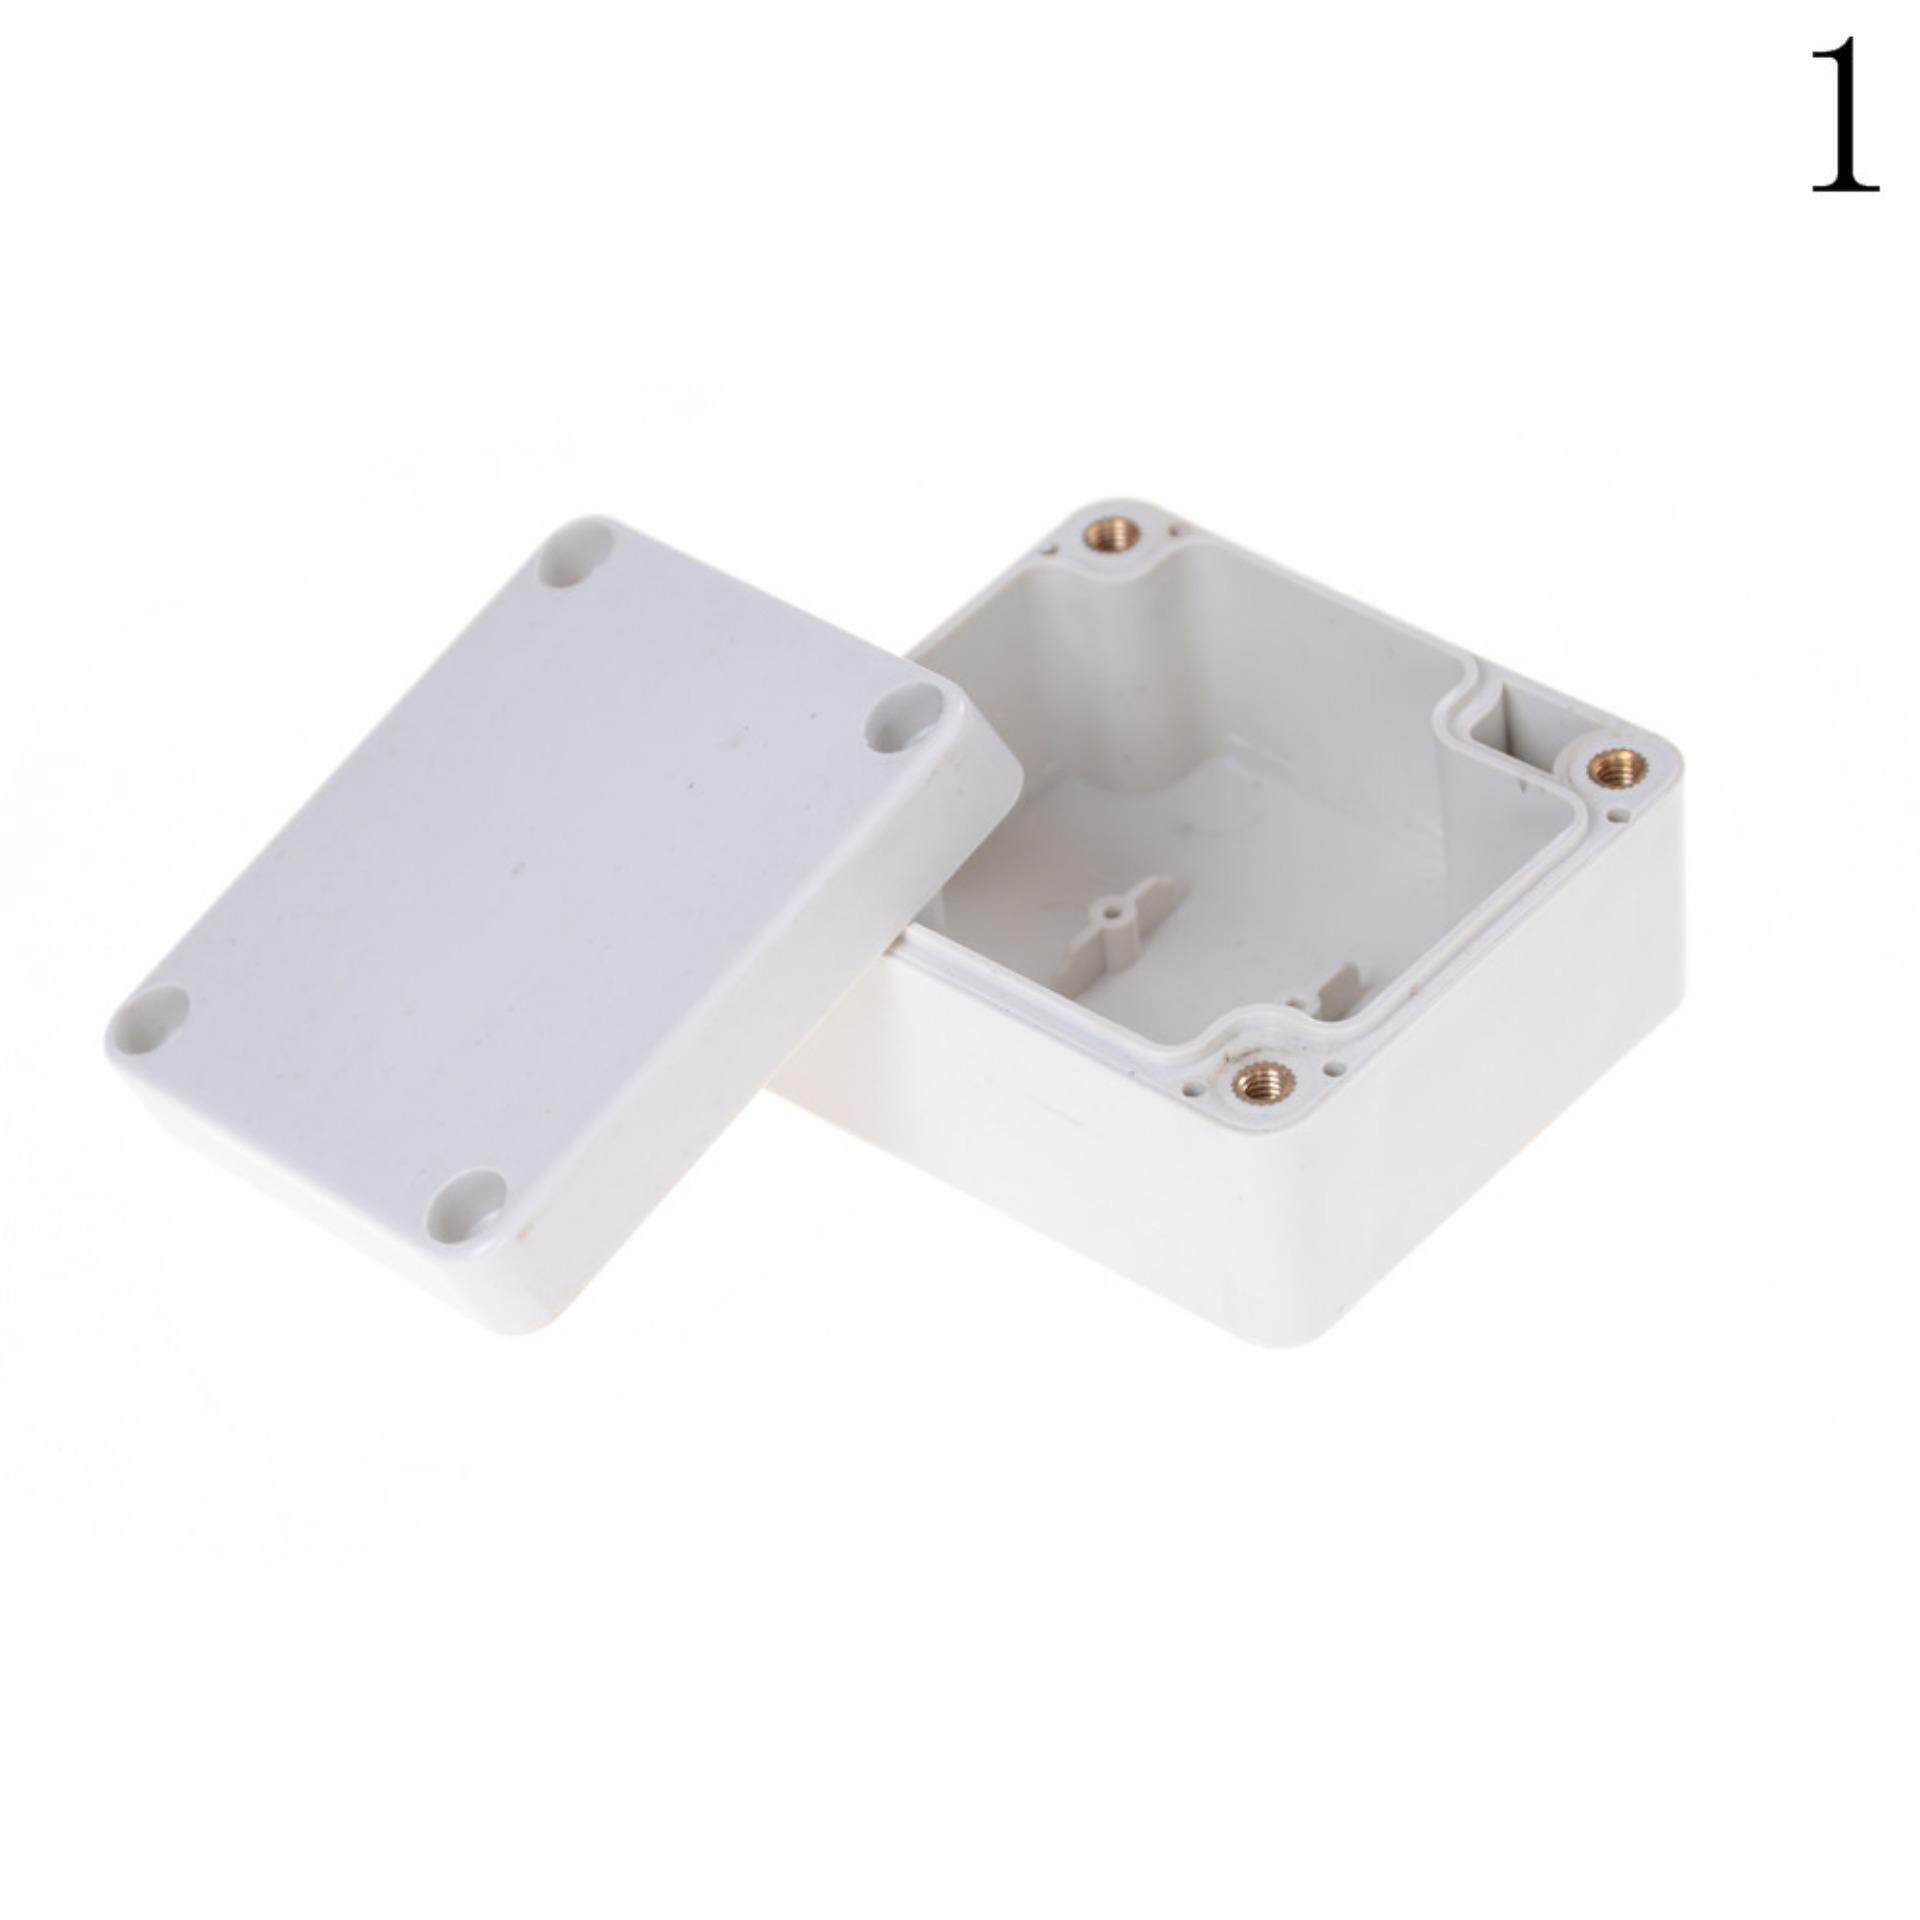 Waterproof Plastic Enclosure Box Electronic Project Instrument Case Style:A1